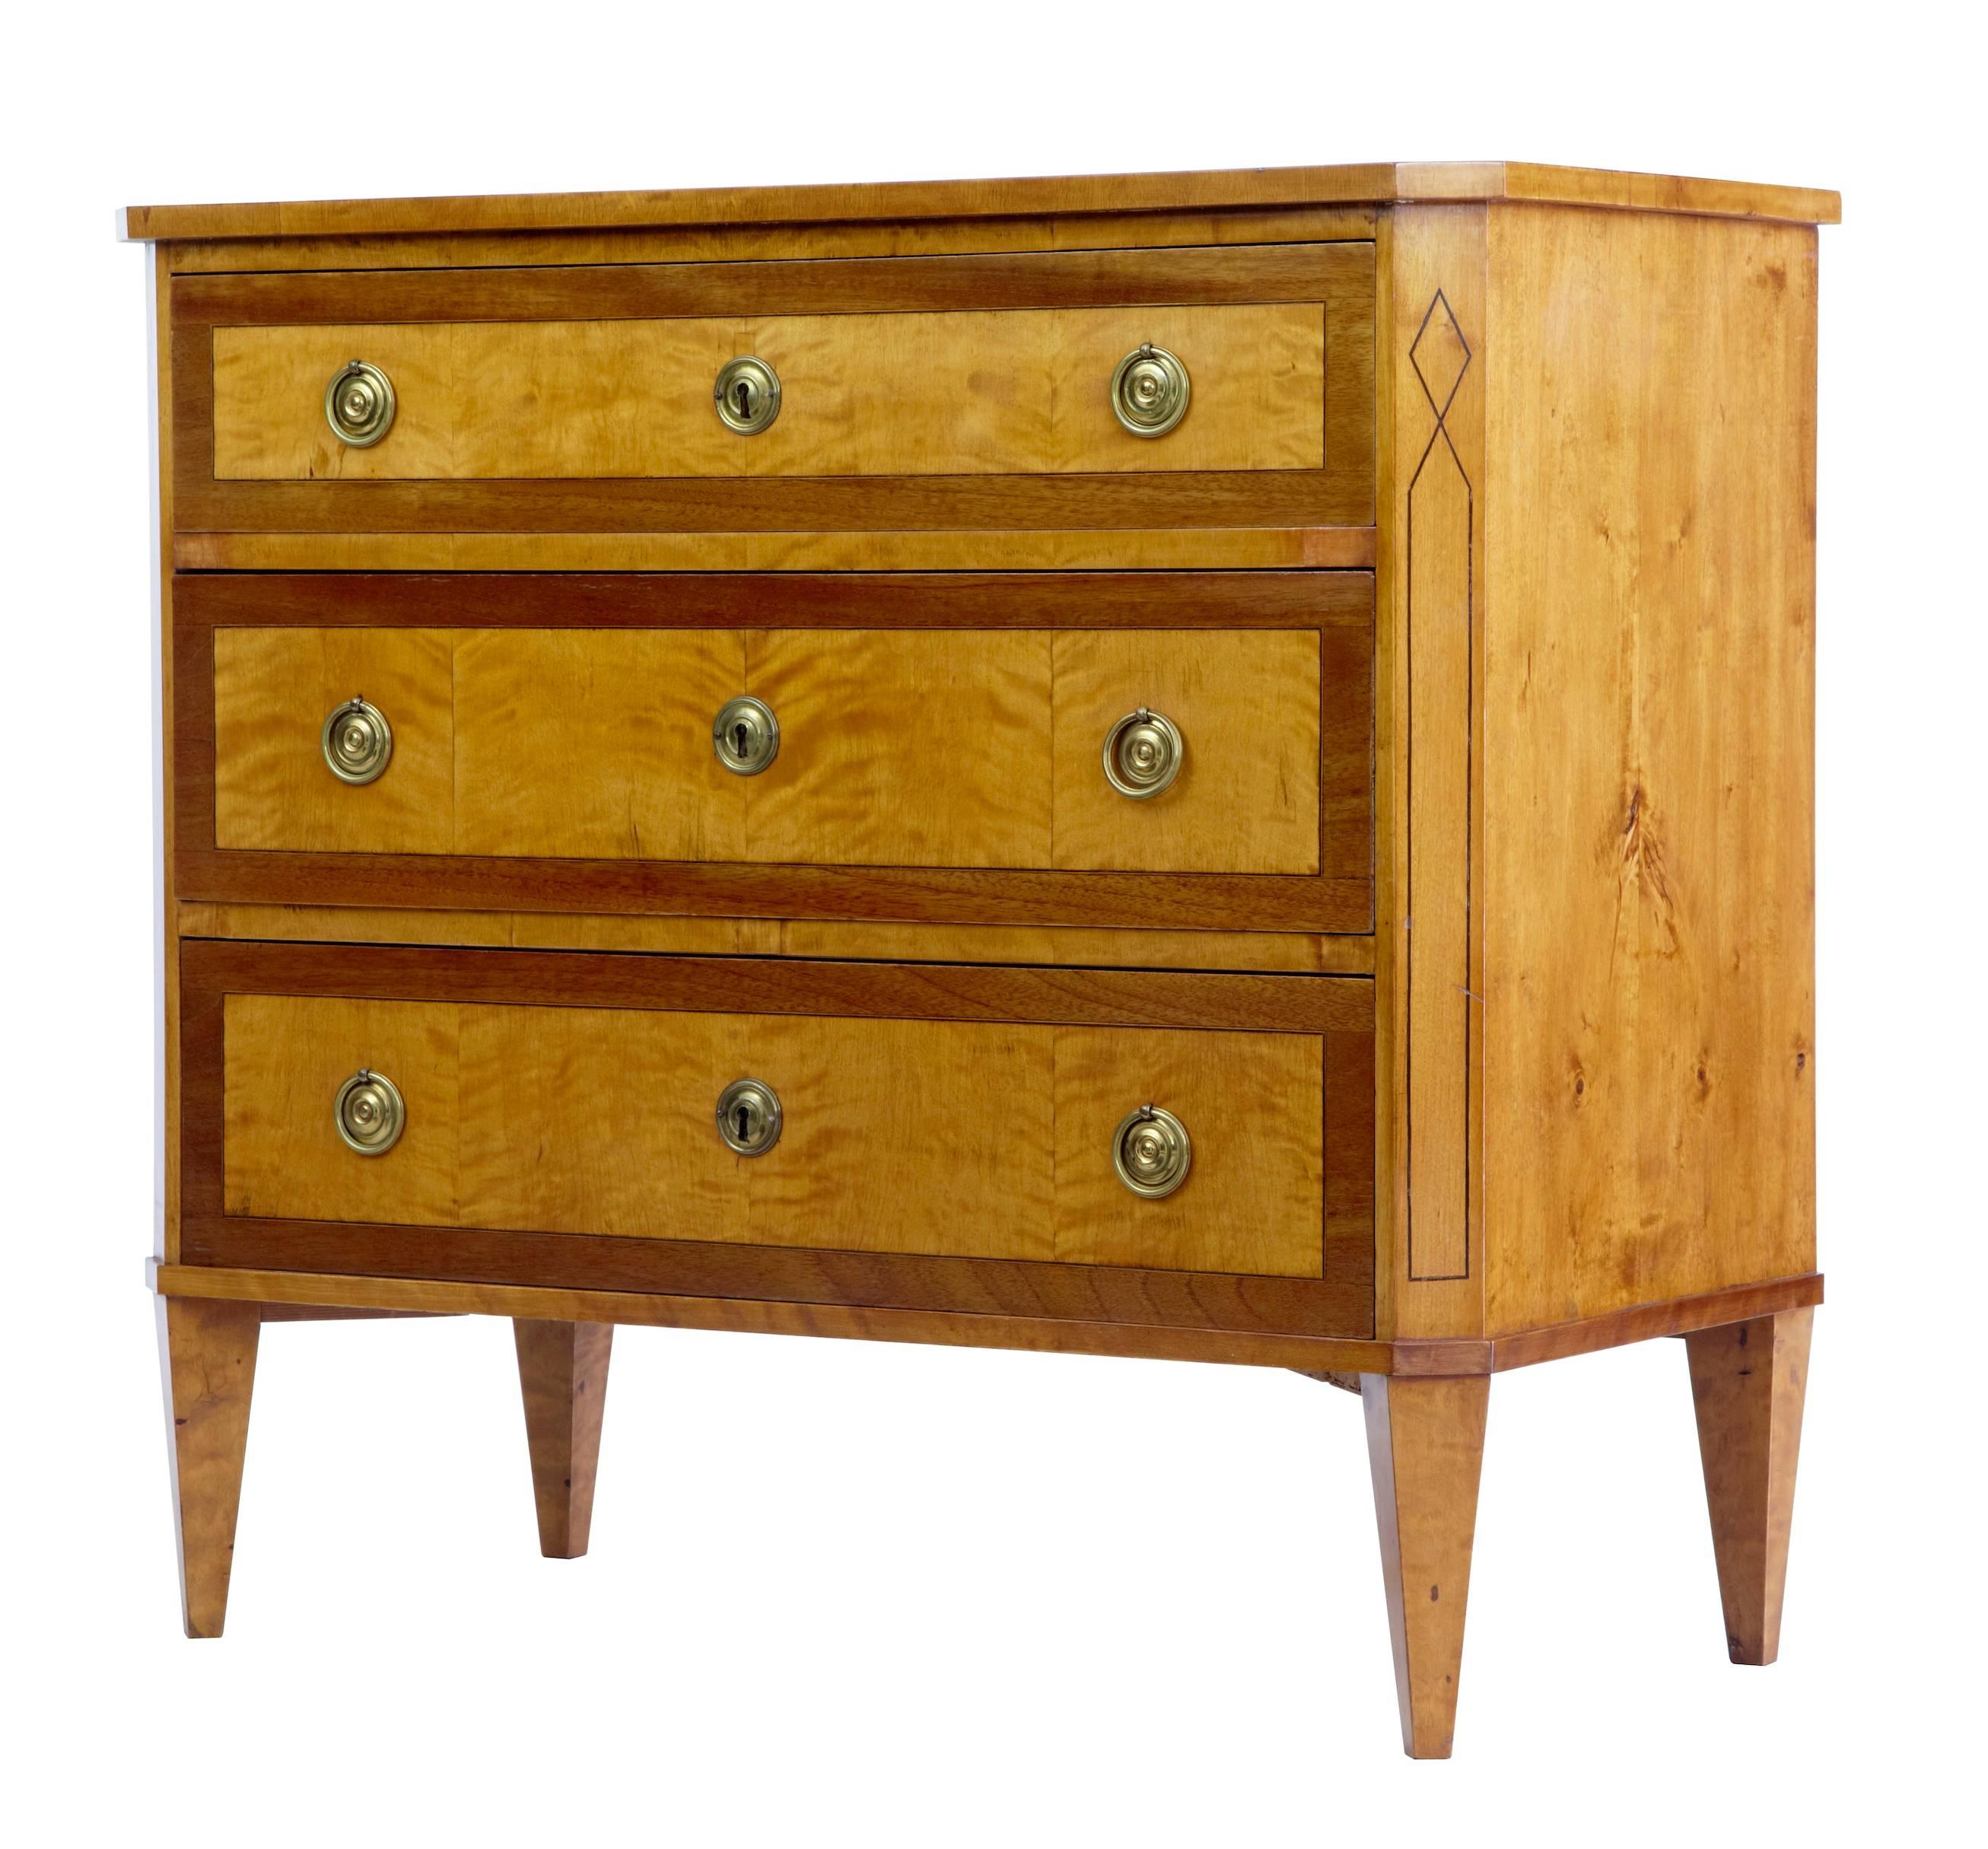 Fine Quality 19th Century Birch Chest of Drawers Commode